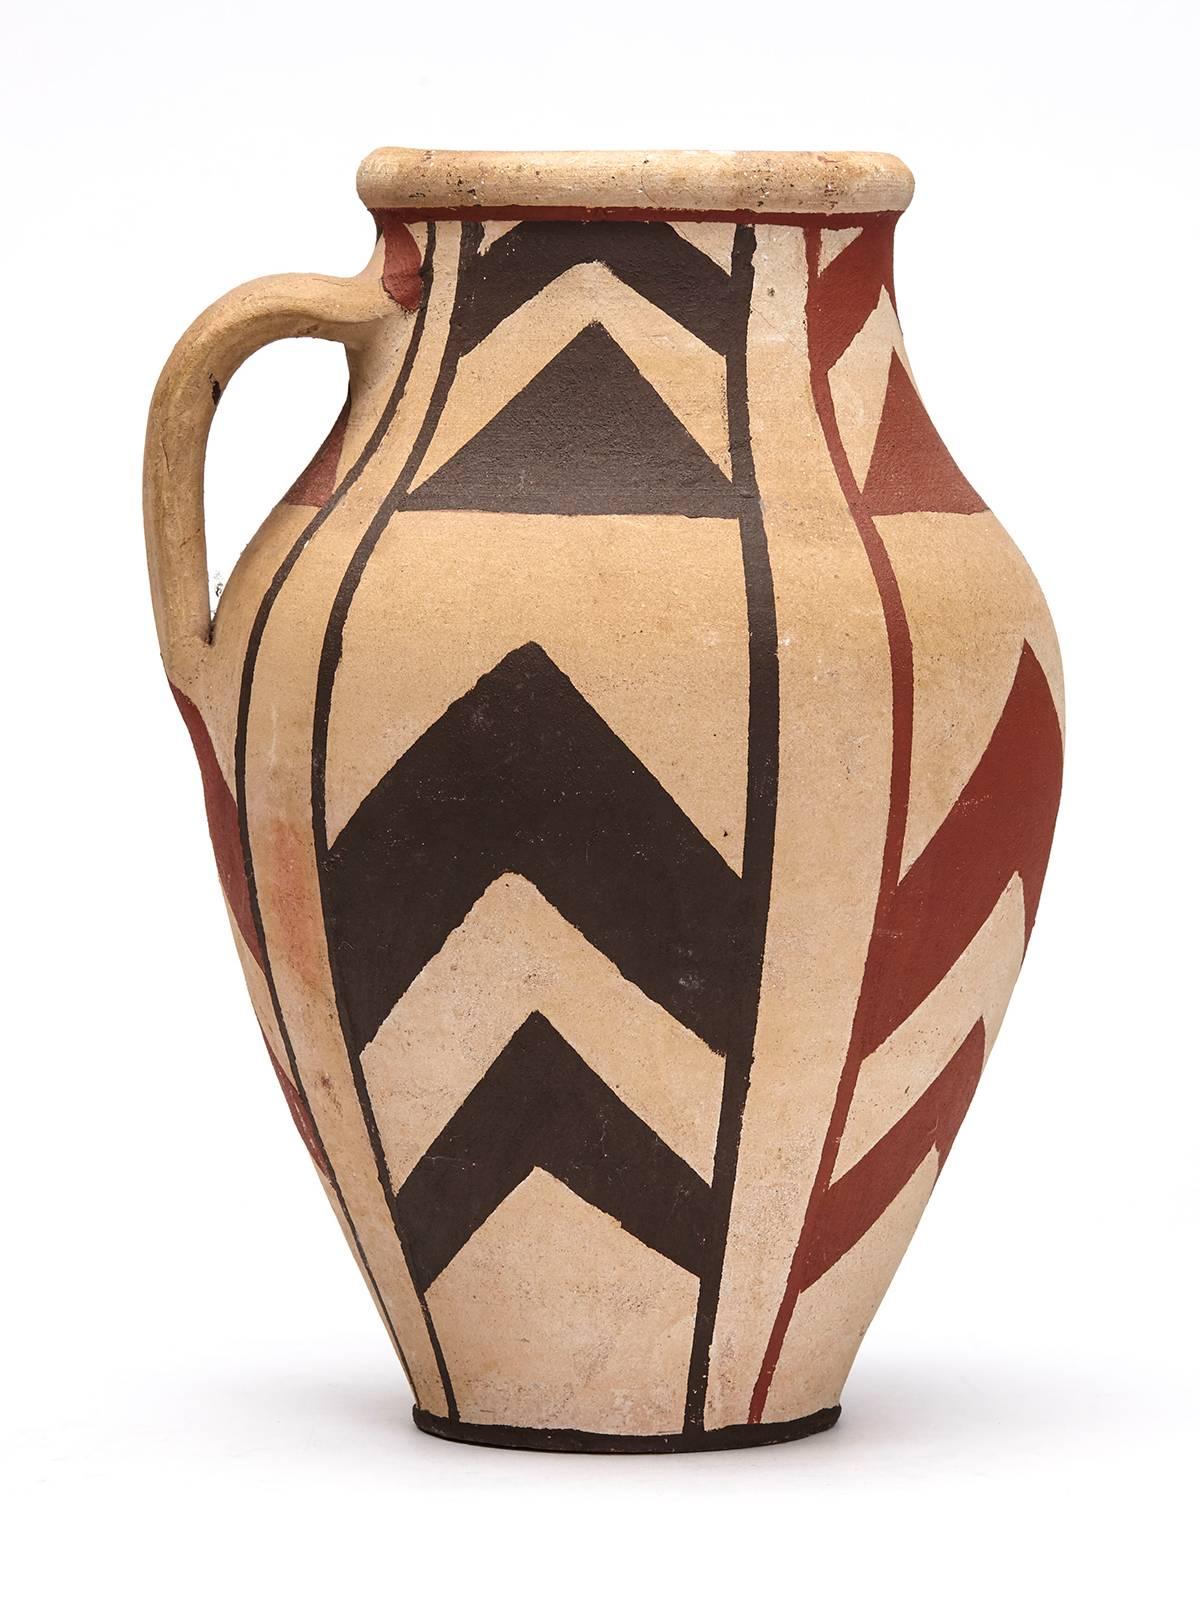 An unusual Studio pottery handled vase (or possibly a jug) hand-painted with native style decoration on an unglazed ground. The large bulbous earthenware vase is hand thrown with a small handle to the top rim and is hand-painted in red and black